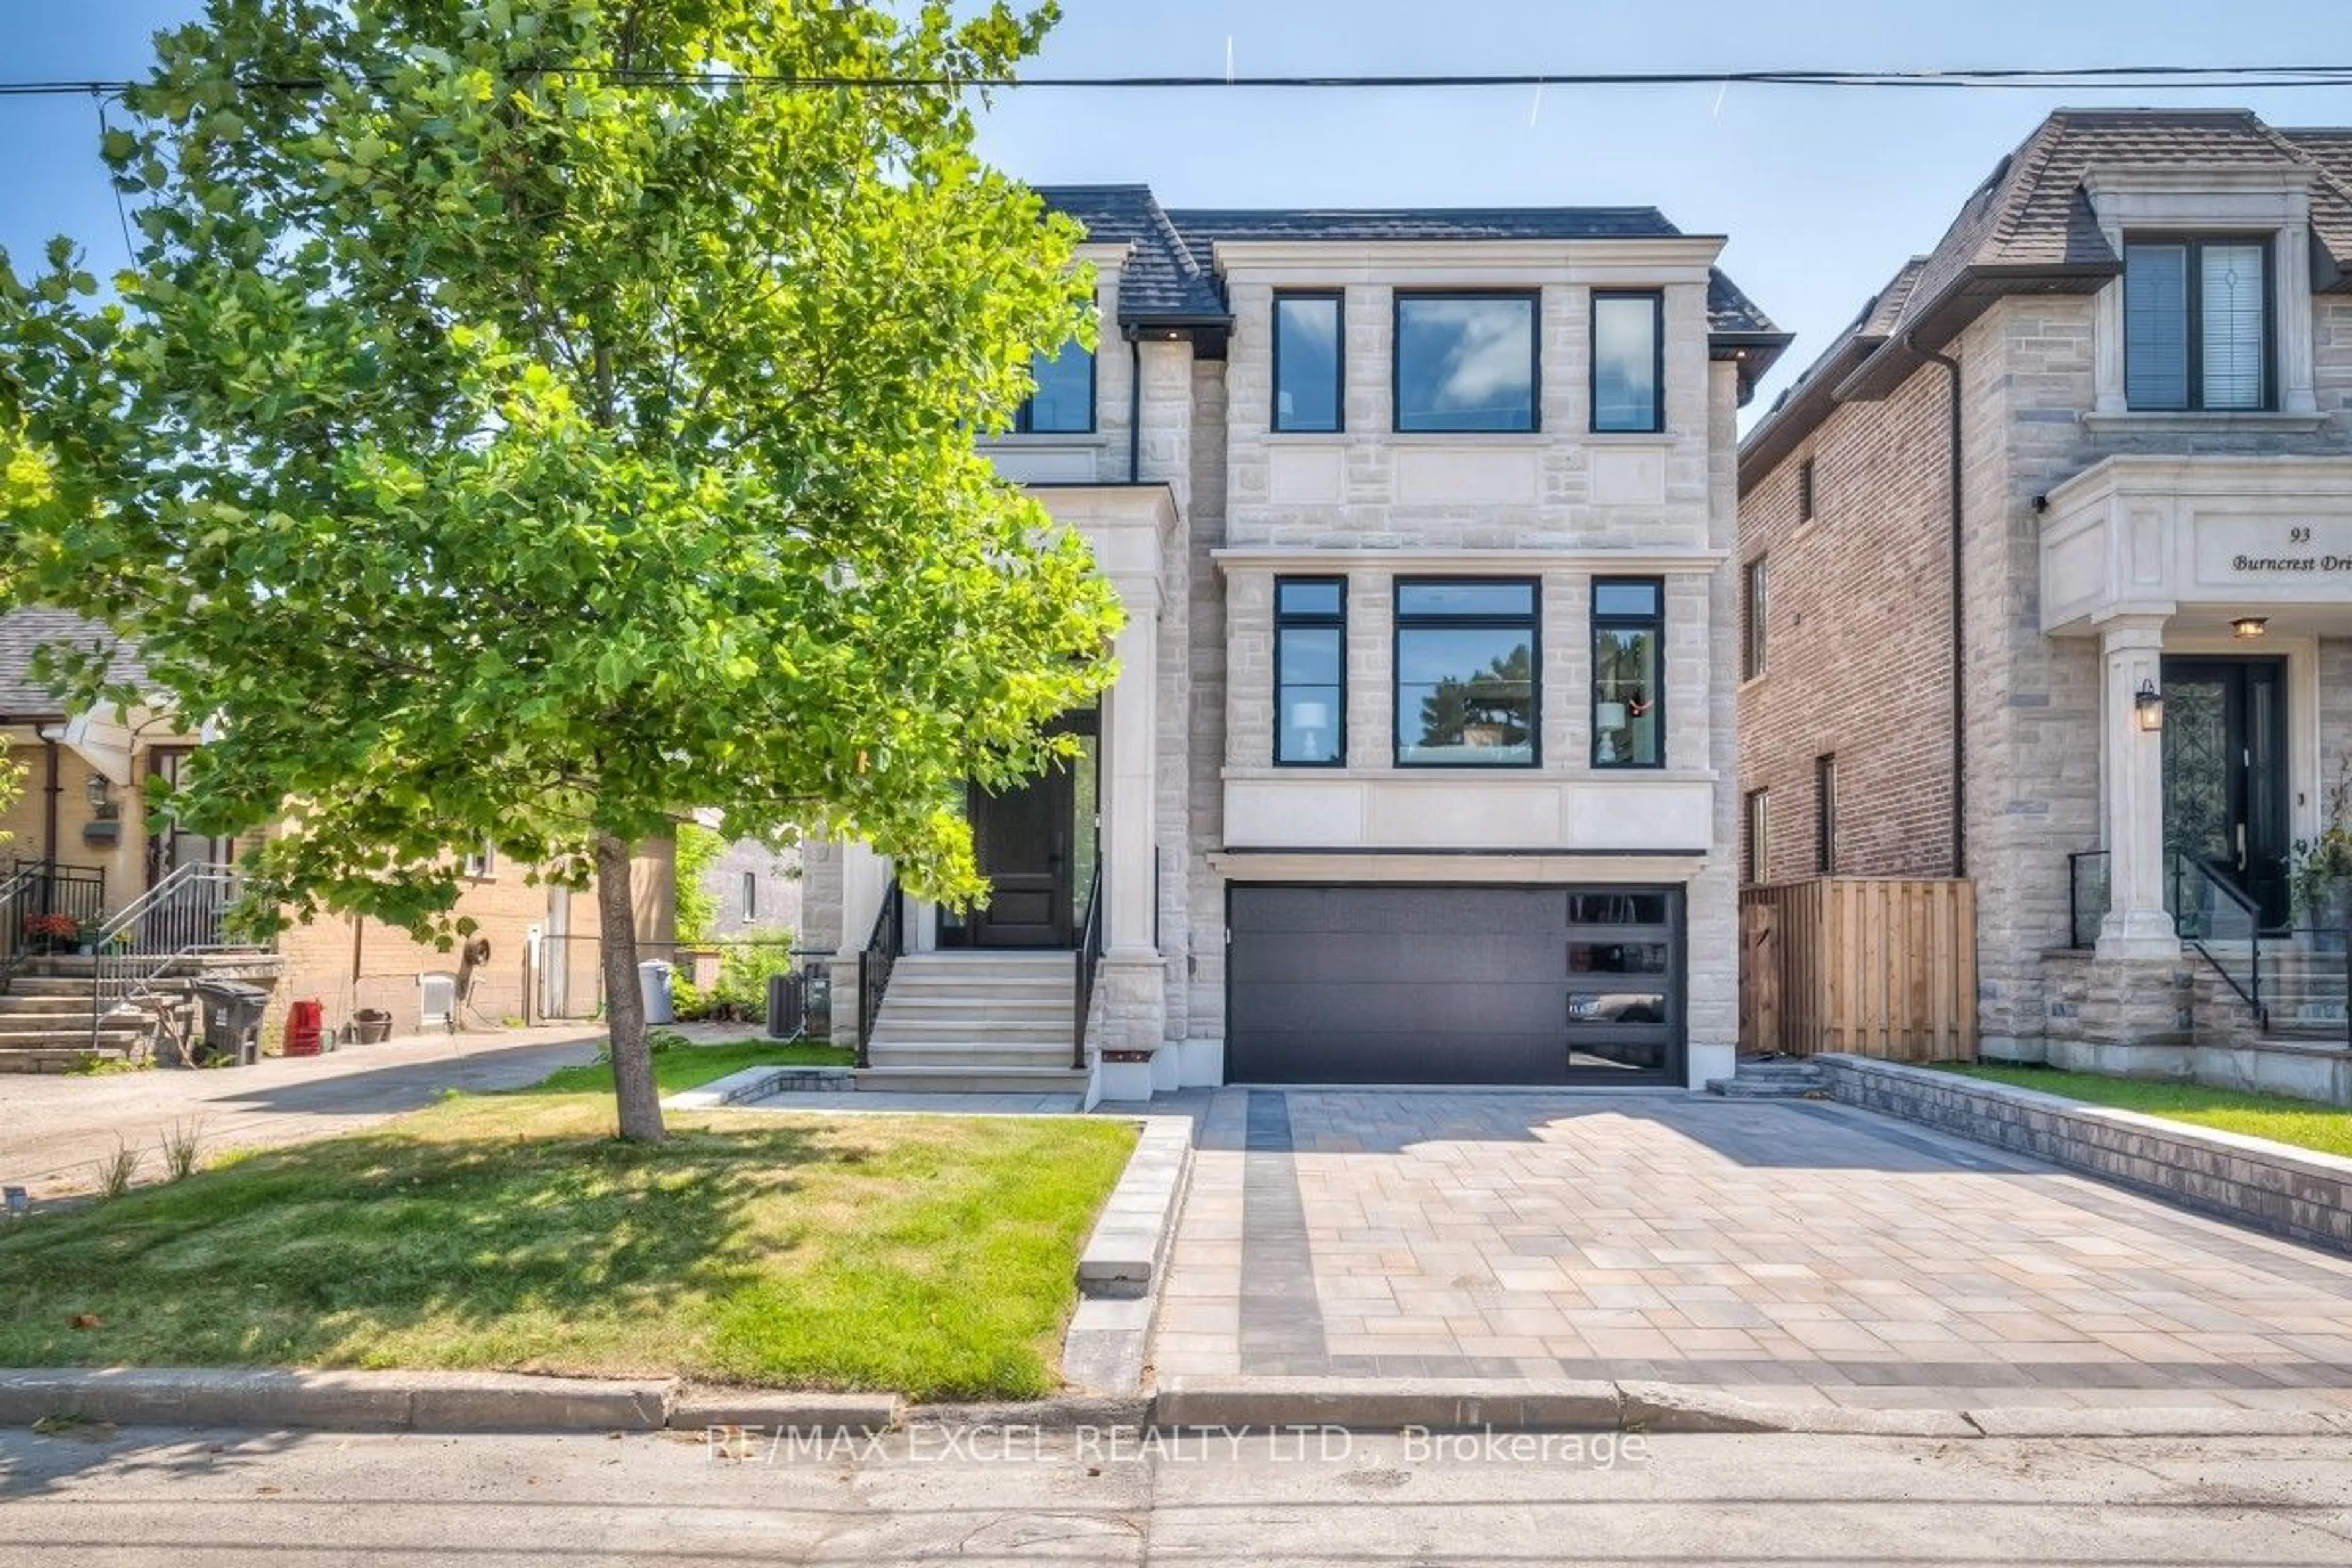 Home with brick exterior material for 91 Burncrest Dr, Toronto Ontario M5M 2Z6